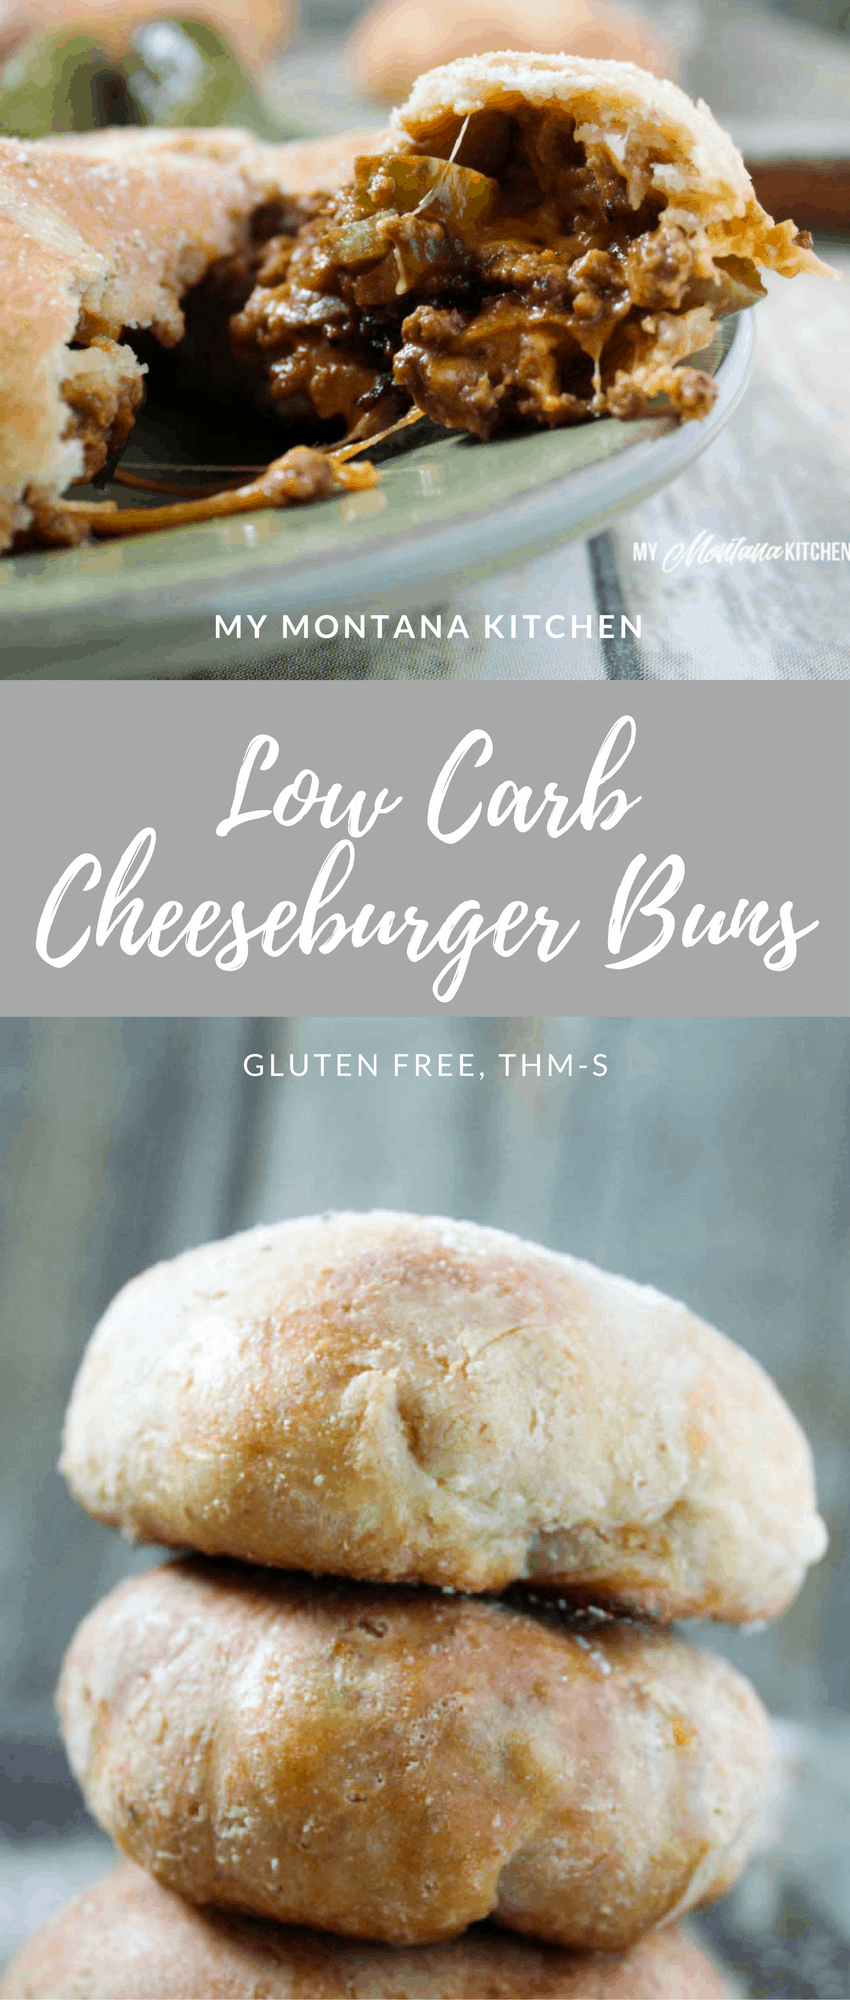 Low Carb Cheeseburger Buns (Gluten Free, THM-S)